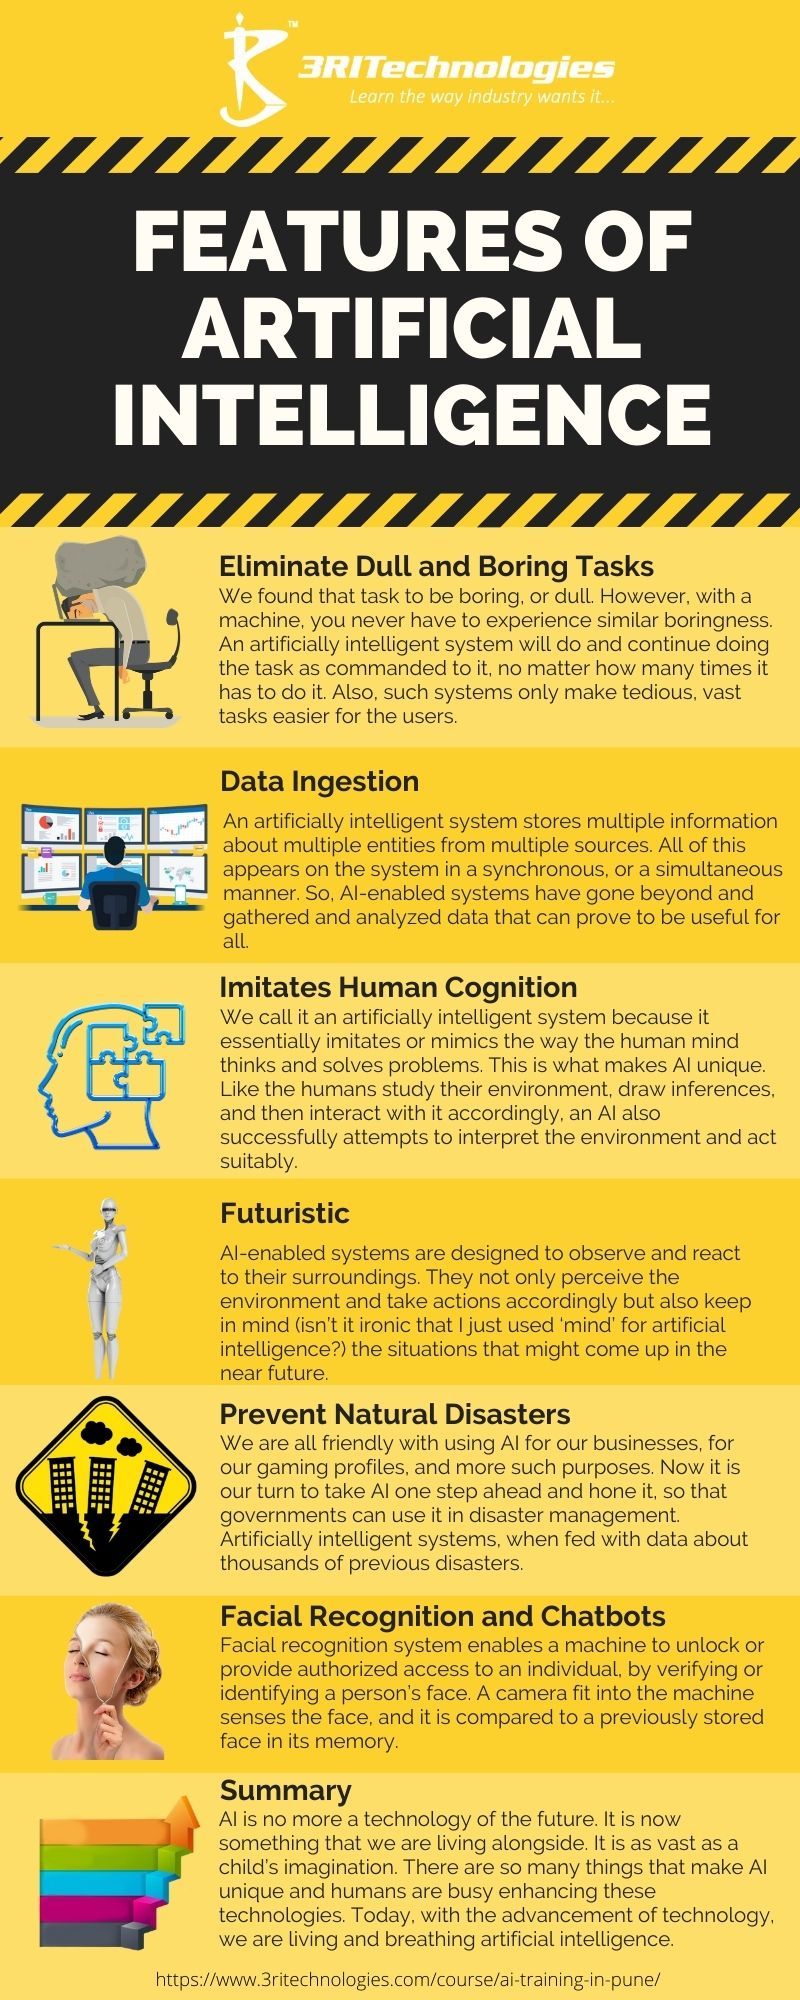 Features of Artificial Intelligence